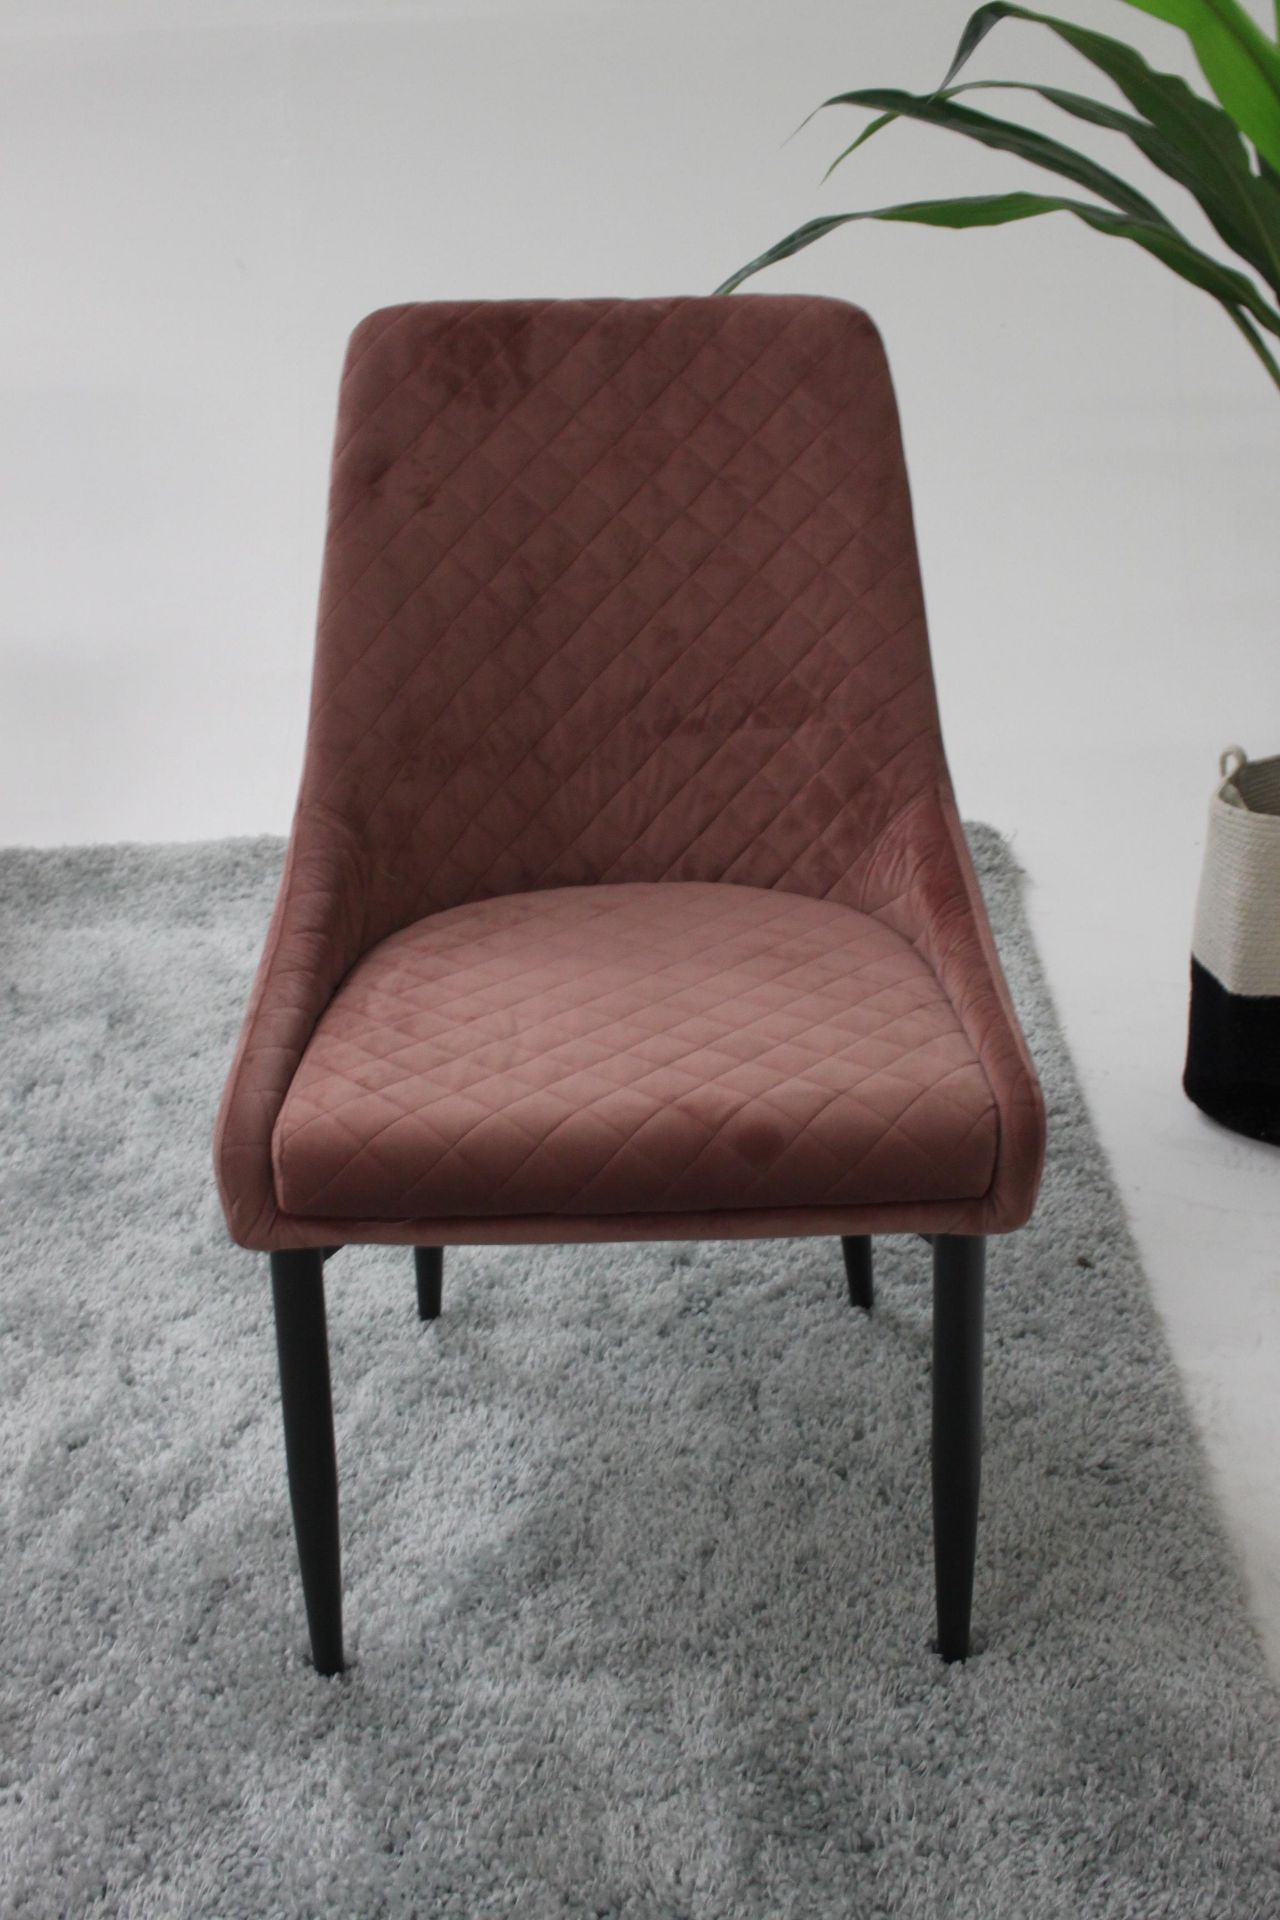 Aston Dining Chair - Image 3 of 3